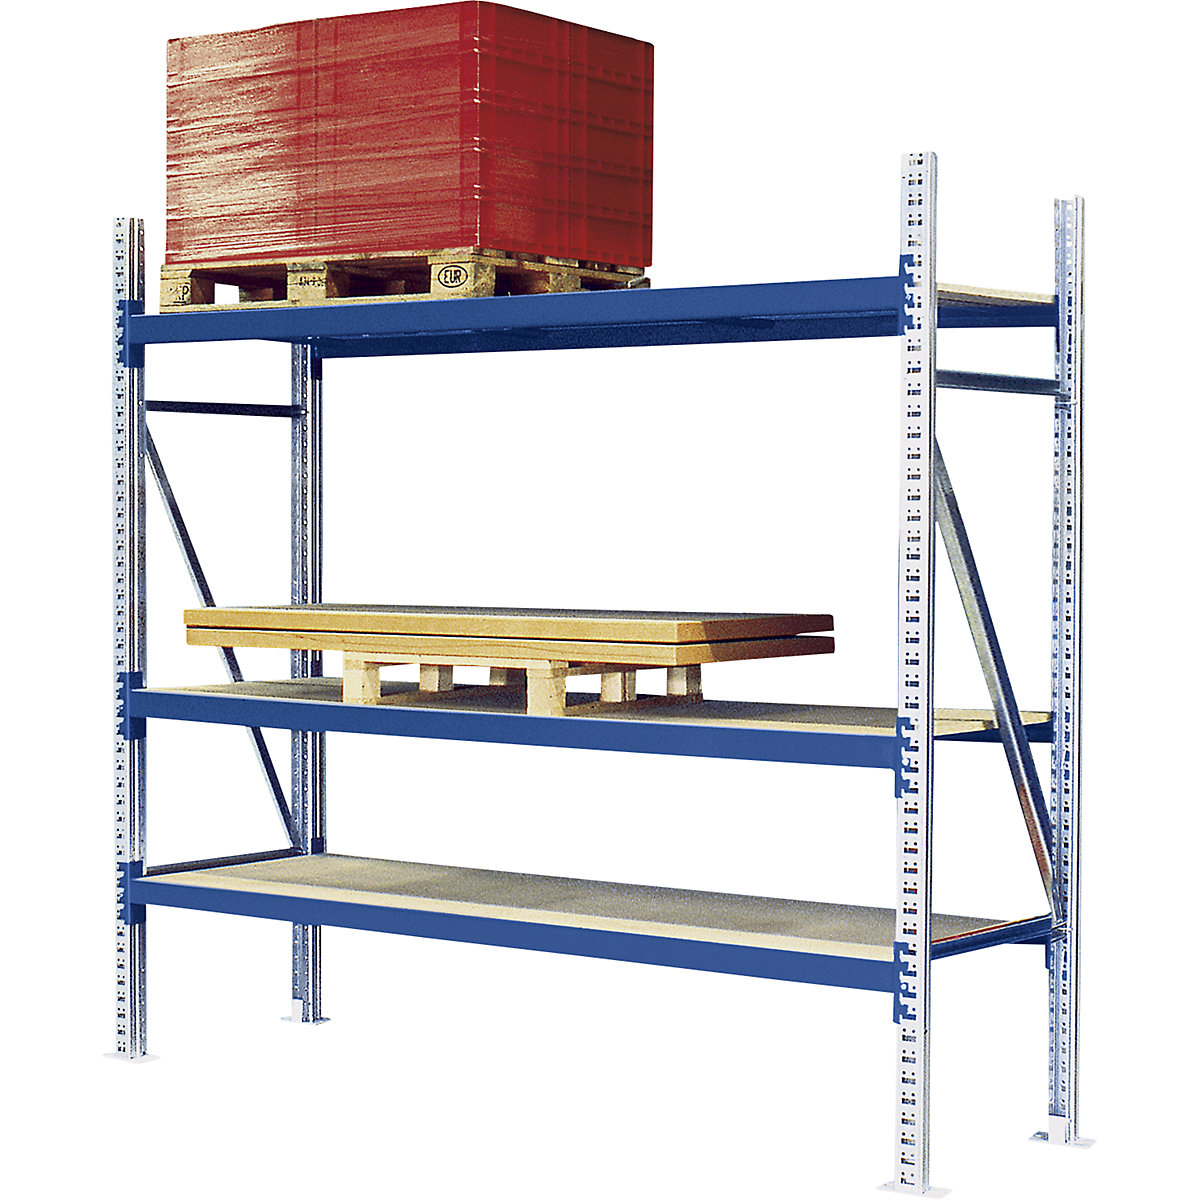 Rayonnage extra-large grande capacité – eurokraft pro, charge max. / rayonnage 4000 kg, h x l x p 2000 x 2700 x 800 mm, rayonnage additionnel, bleu RAL 5010-6